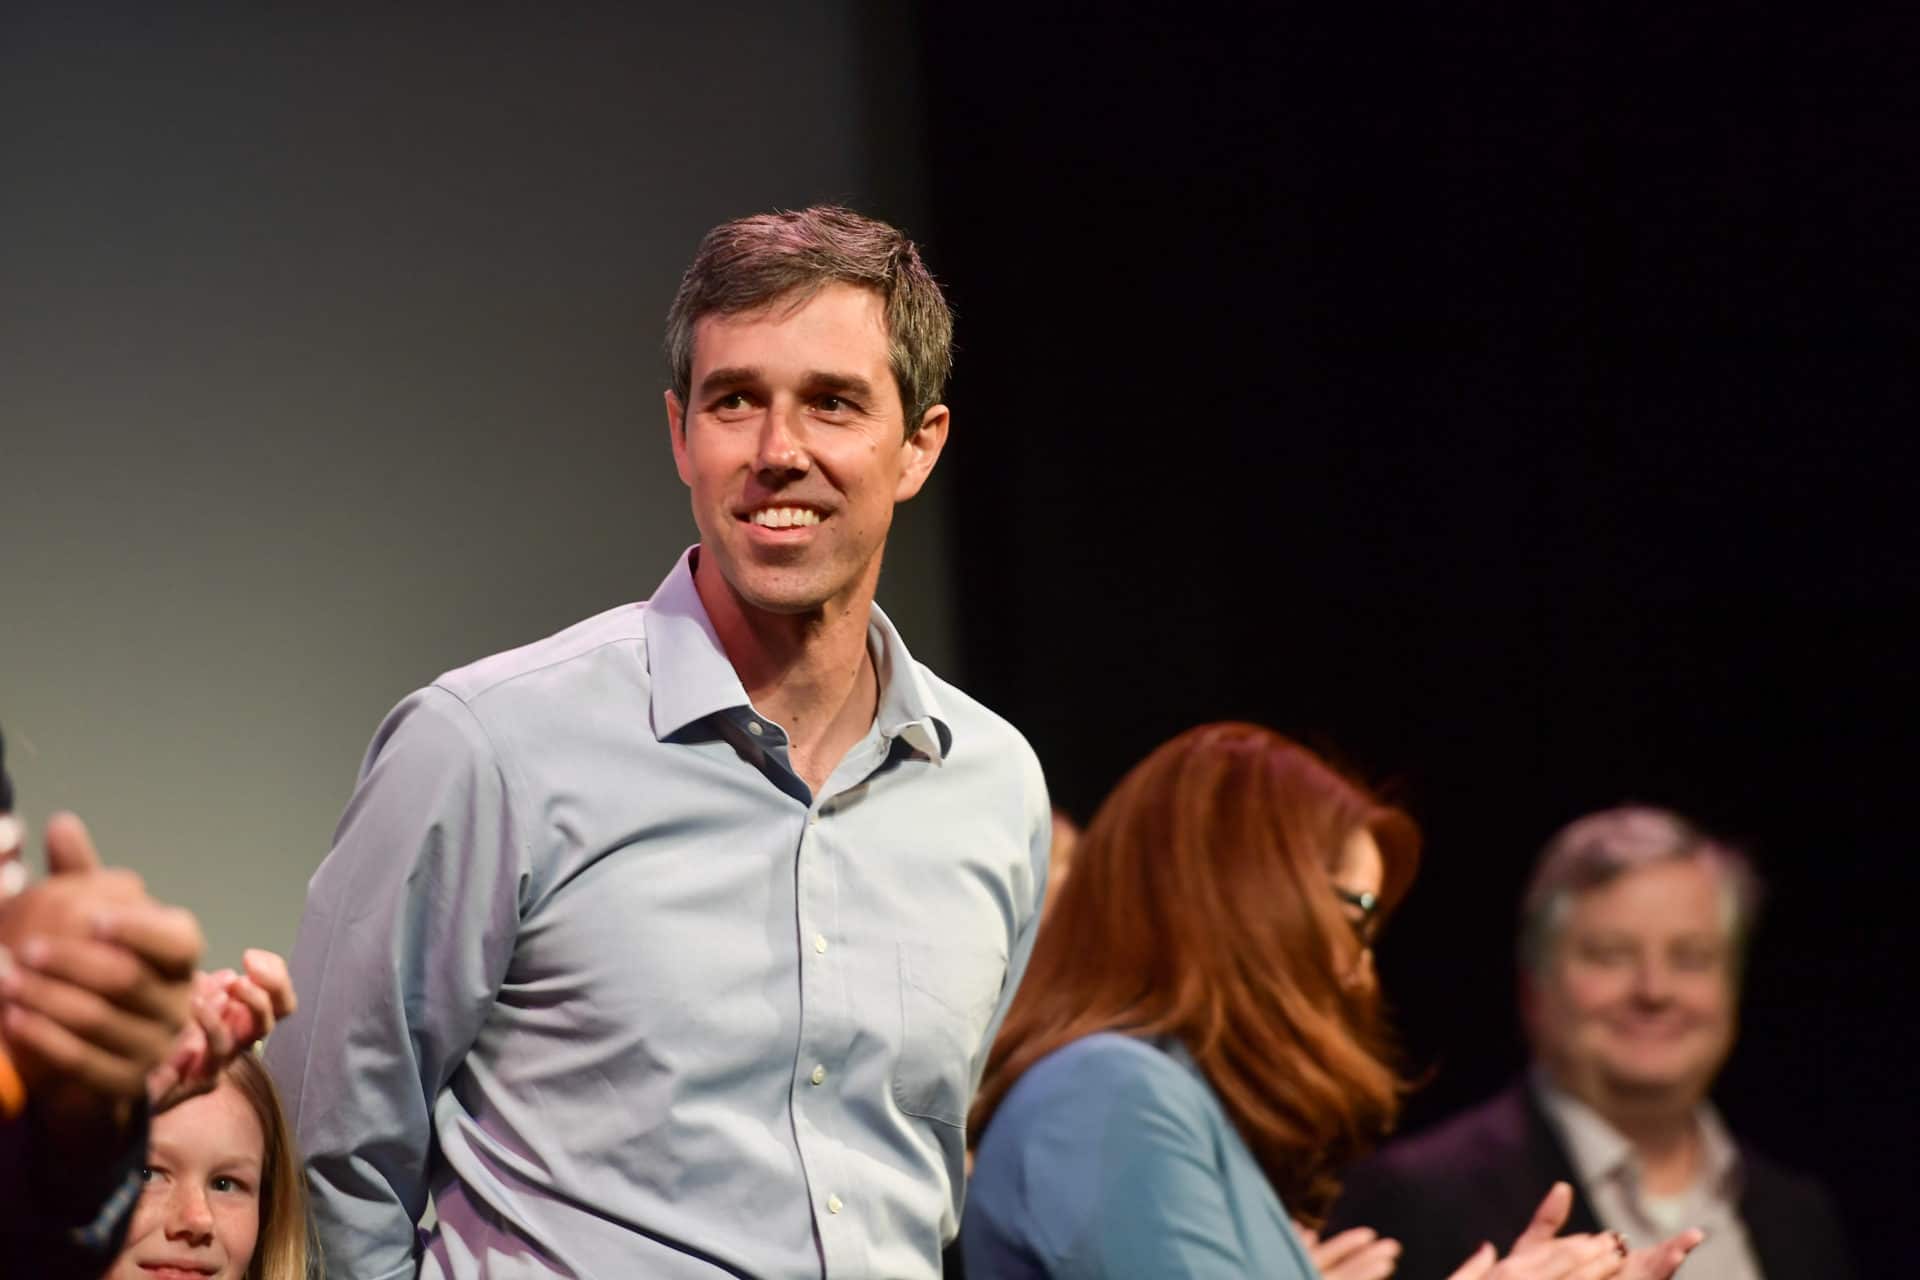 Beto O’Rourke Shares He Is The Descendant Of Slave Owners